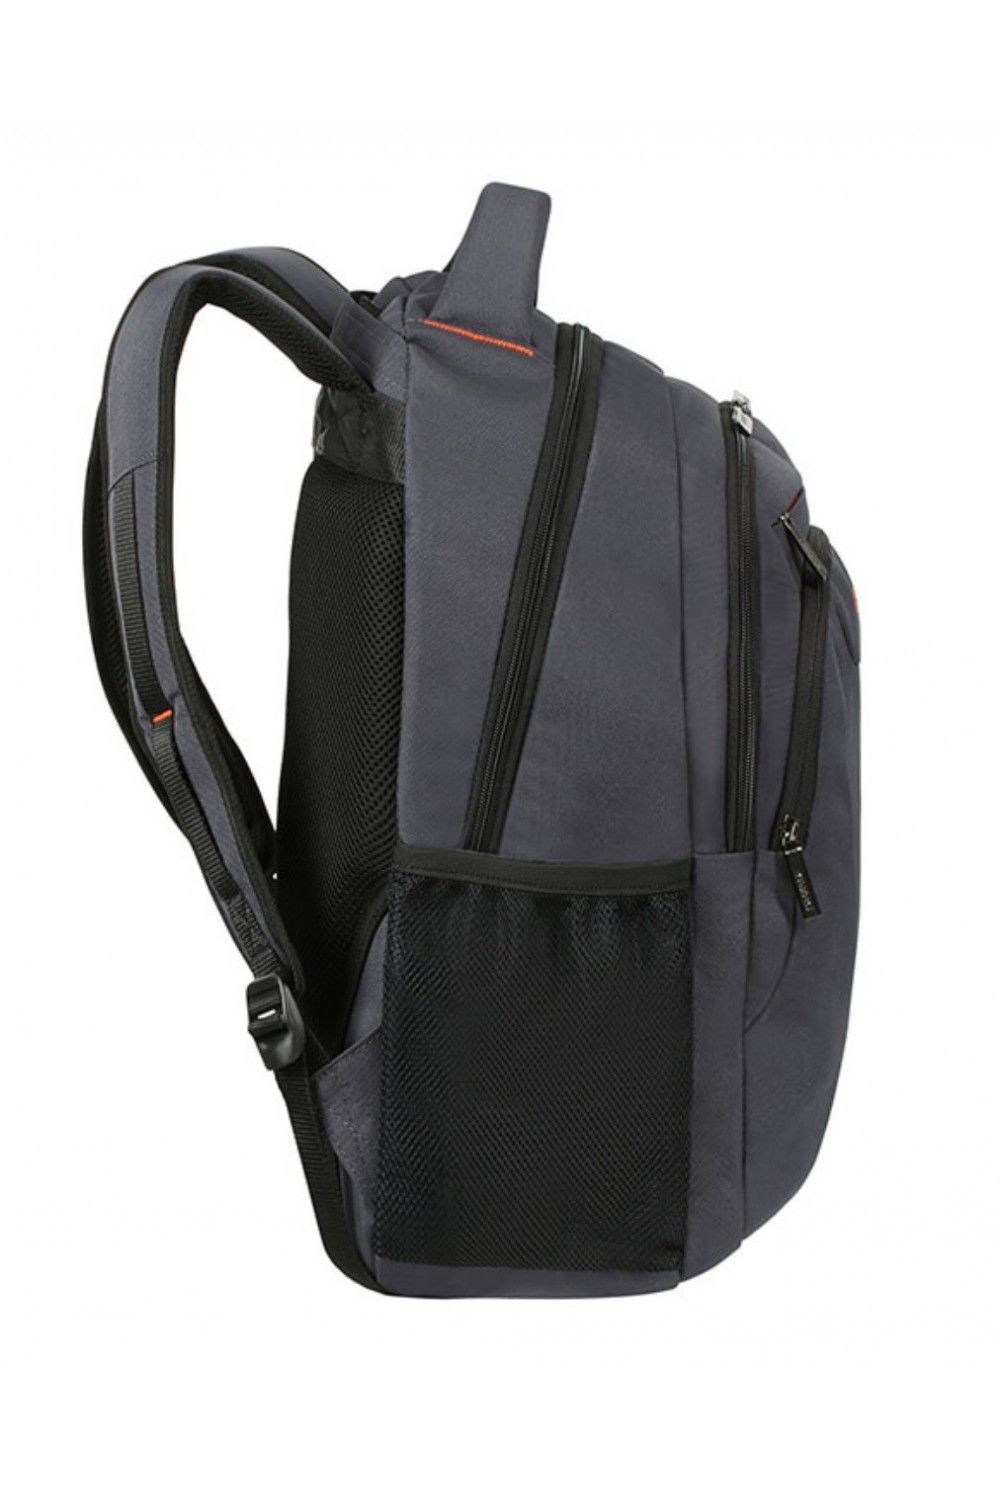 AT Laptop Backpack Work 15,6 pouces